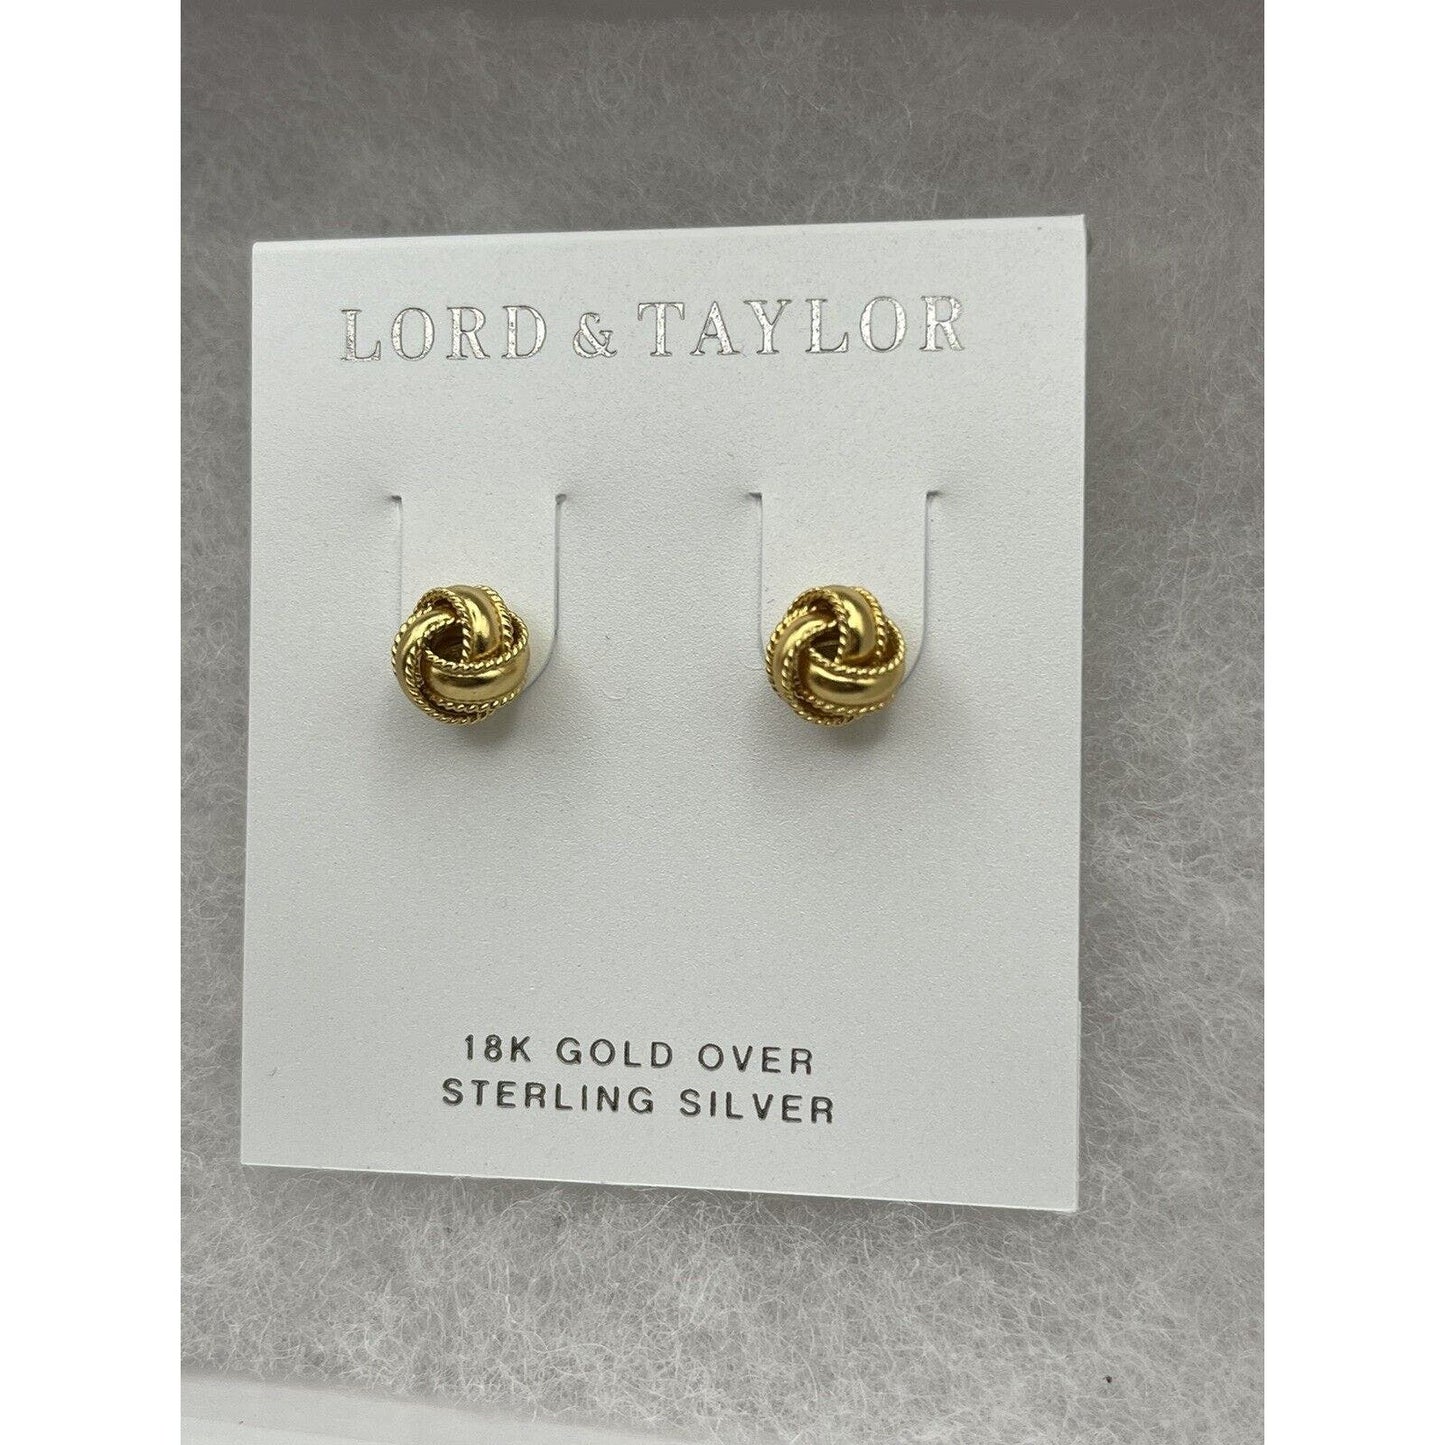 18K Gold Over Sterling Silver Stud Earrings By Lord & Taylor Brand New Tags $70